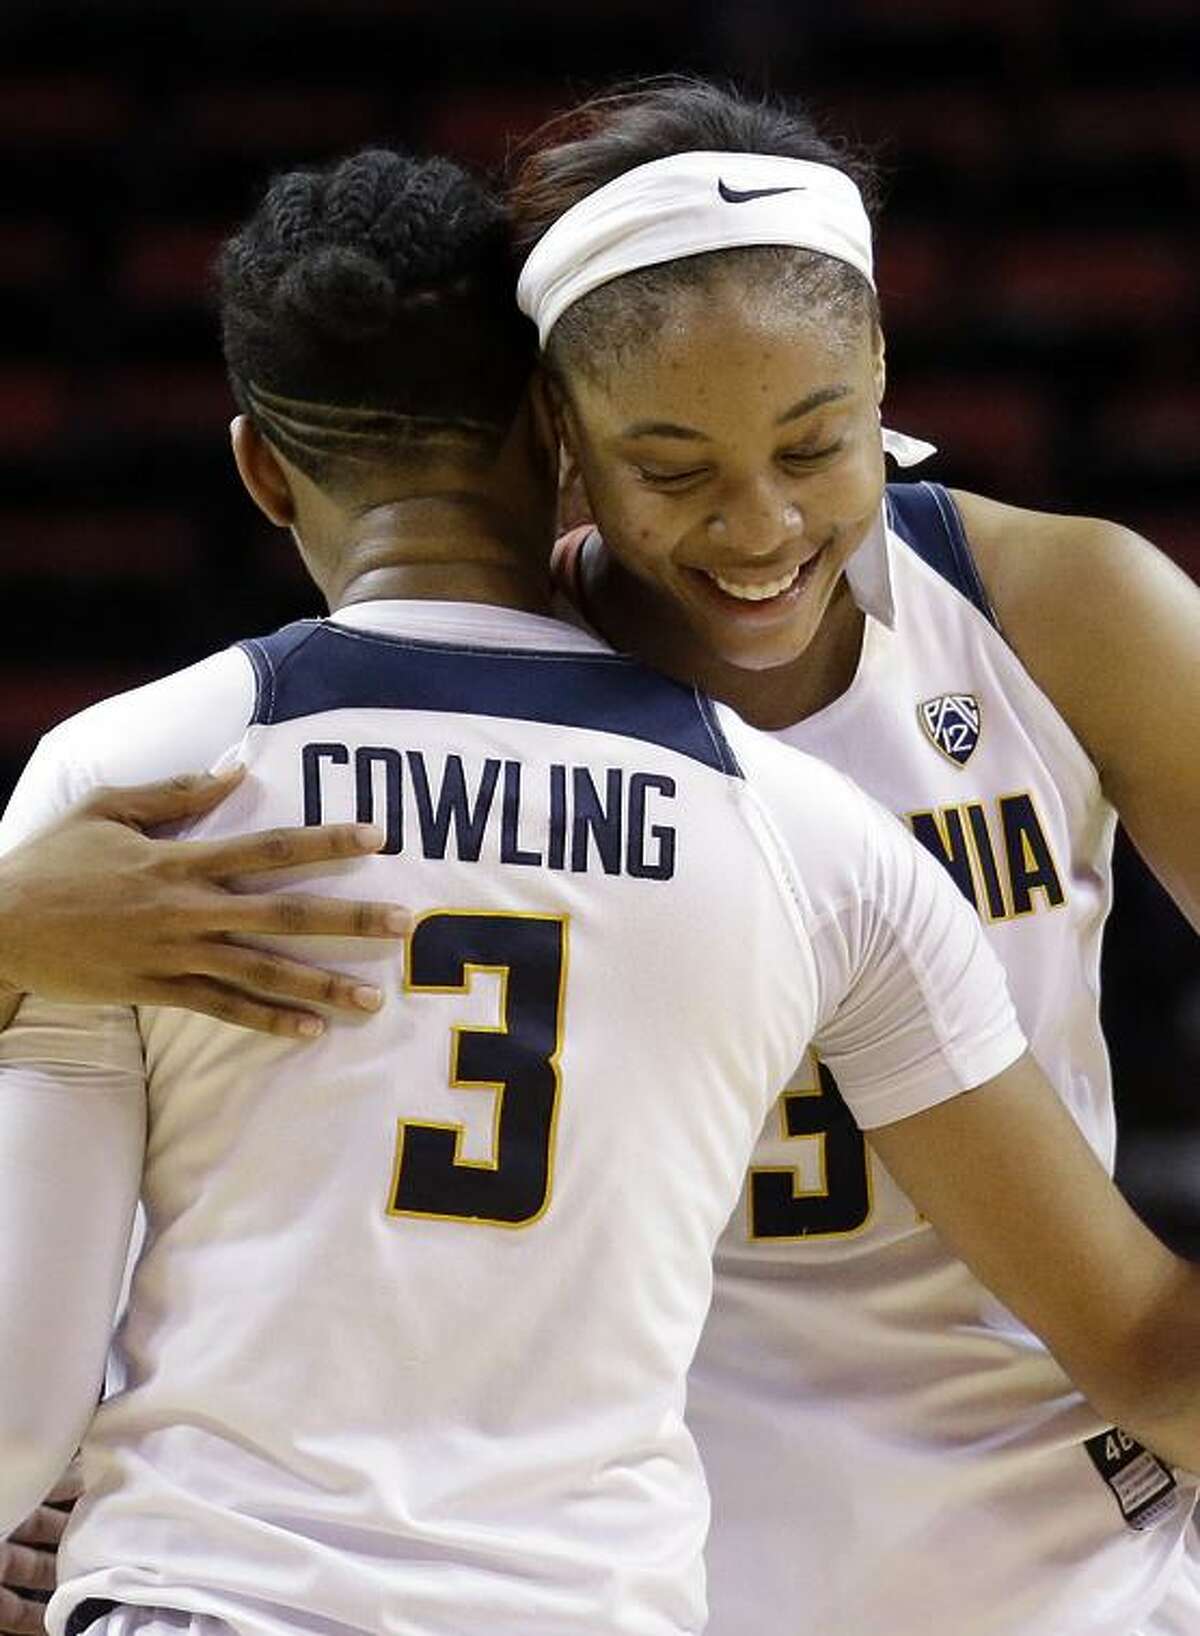 FILE - Mikayla Cowling, here embracing Kristine Anigwe, is among Cal’s best players on both sides of the court. Cal faced UCLA in a game over the weekend that saw the team losing to the Bruins, 82-46.